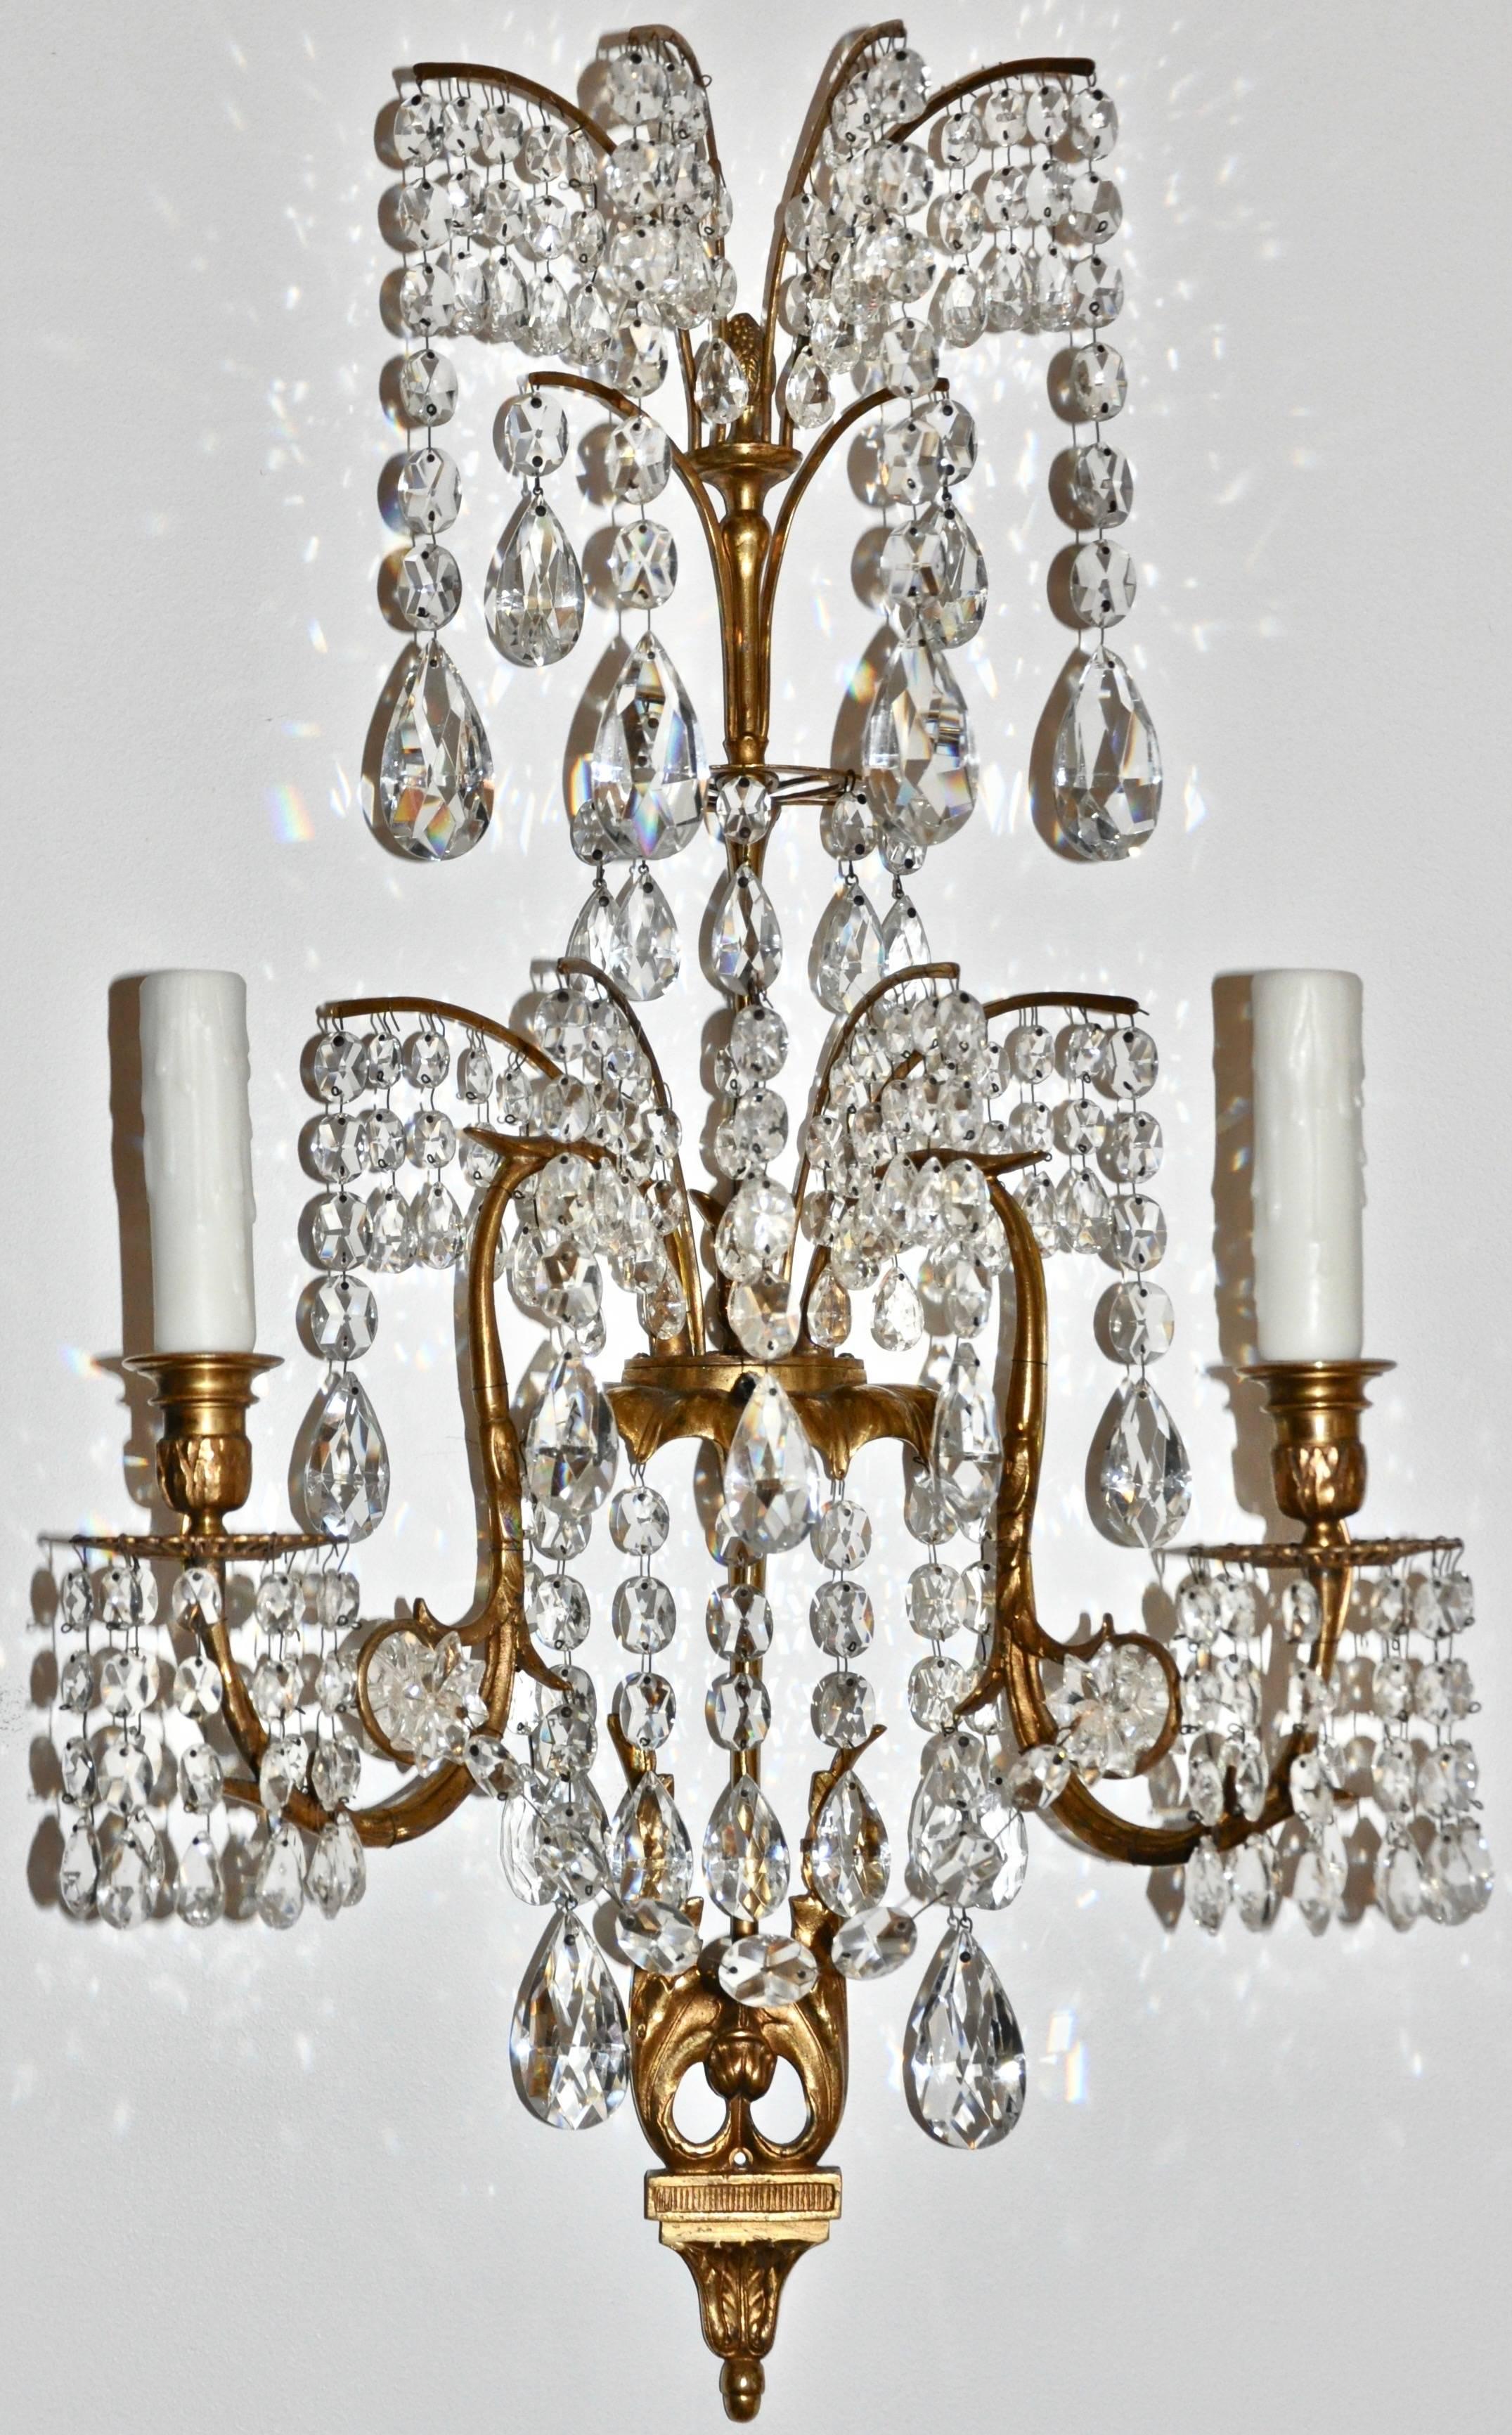 Set of four gilt bronze and crystal sconces in the manner of Karl Friedrich Schinkel

Neoclassical fountain form with original crystals and original gilding. Two arm. Of German or Russian
Manufacture
French wired and include custom backplates